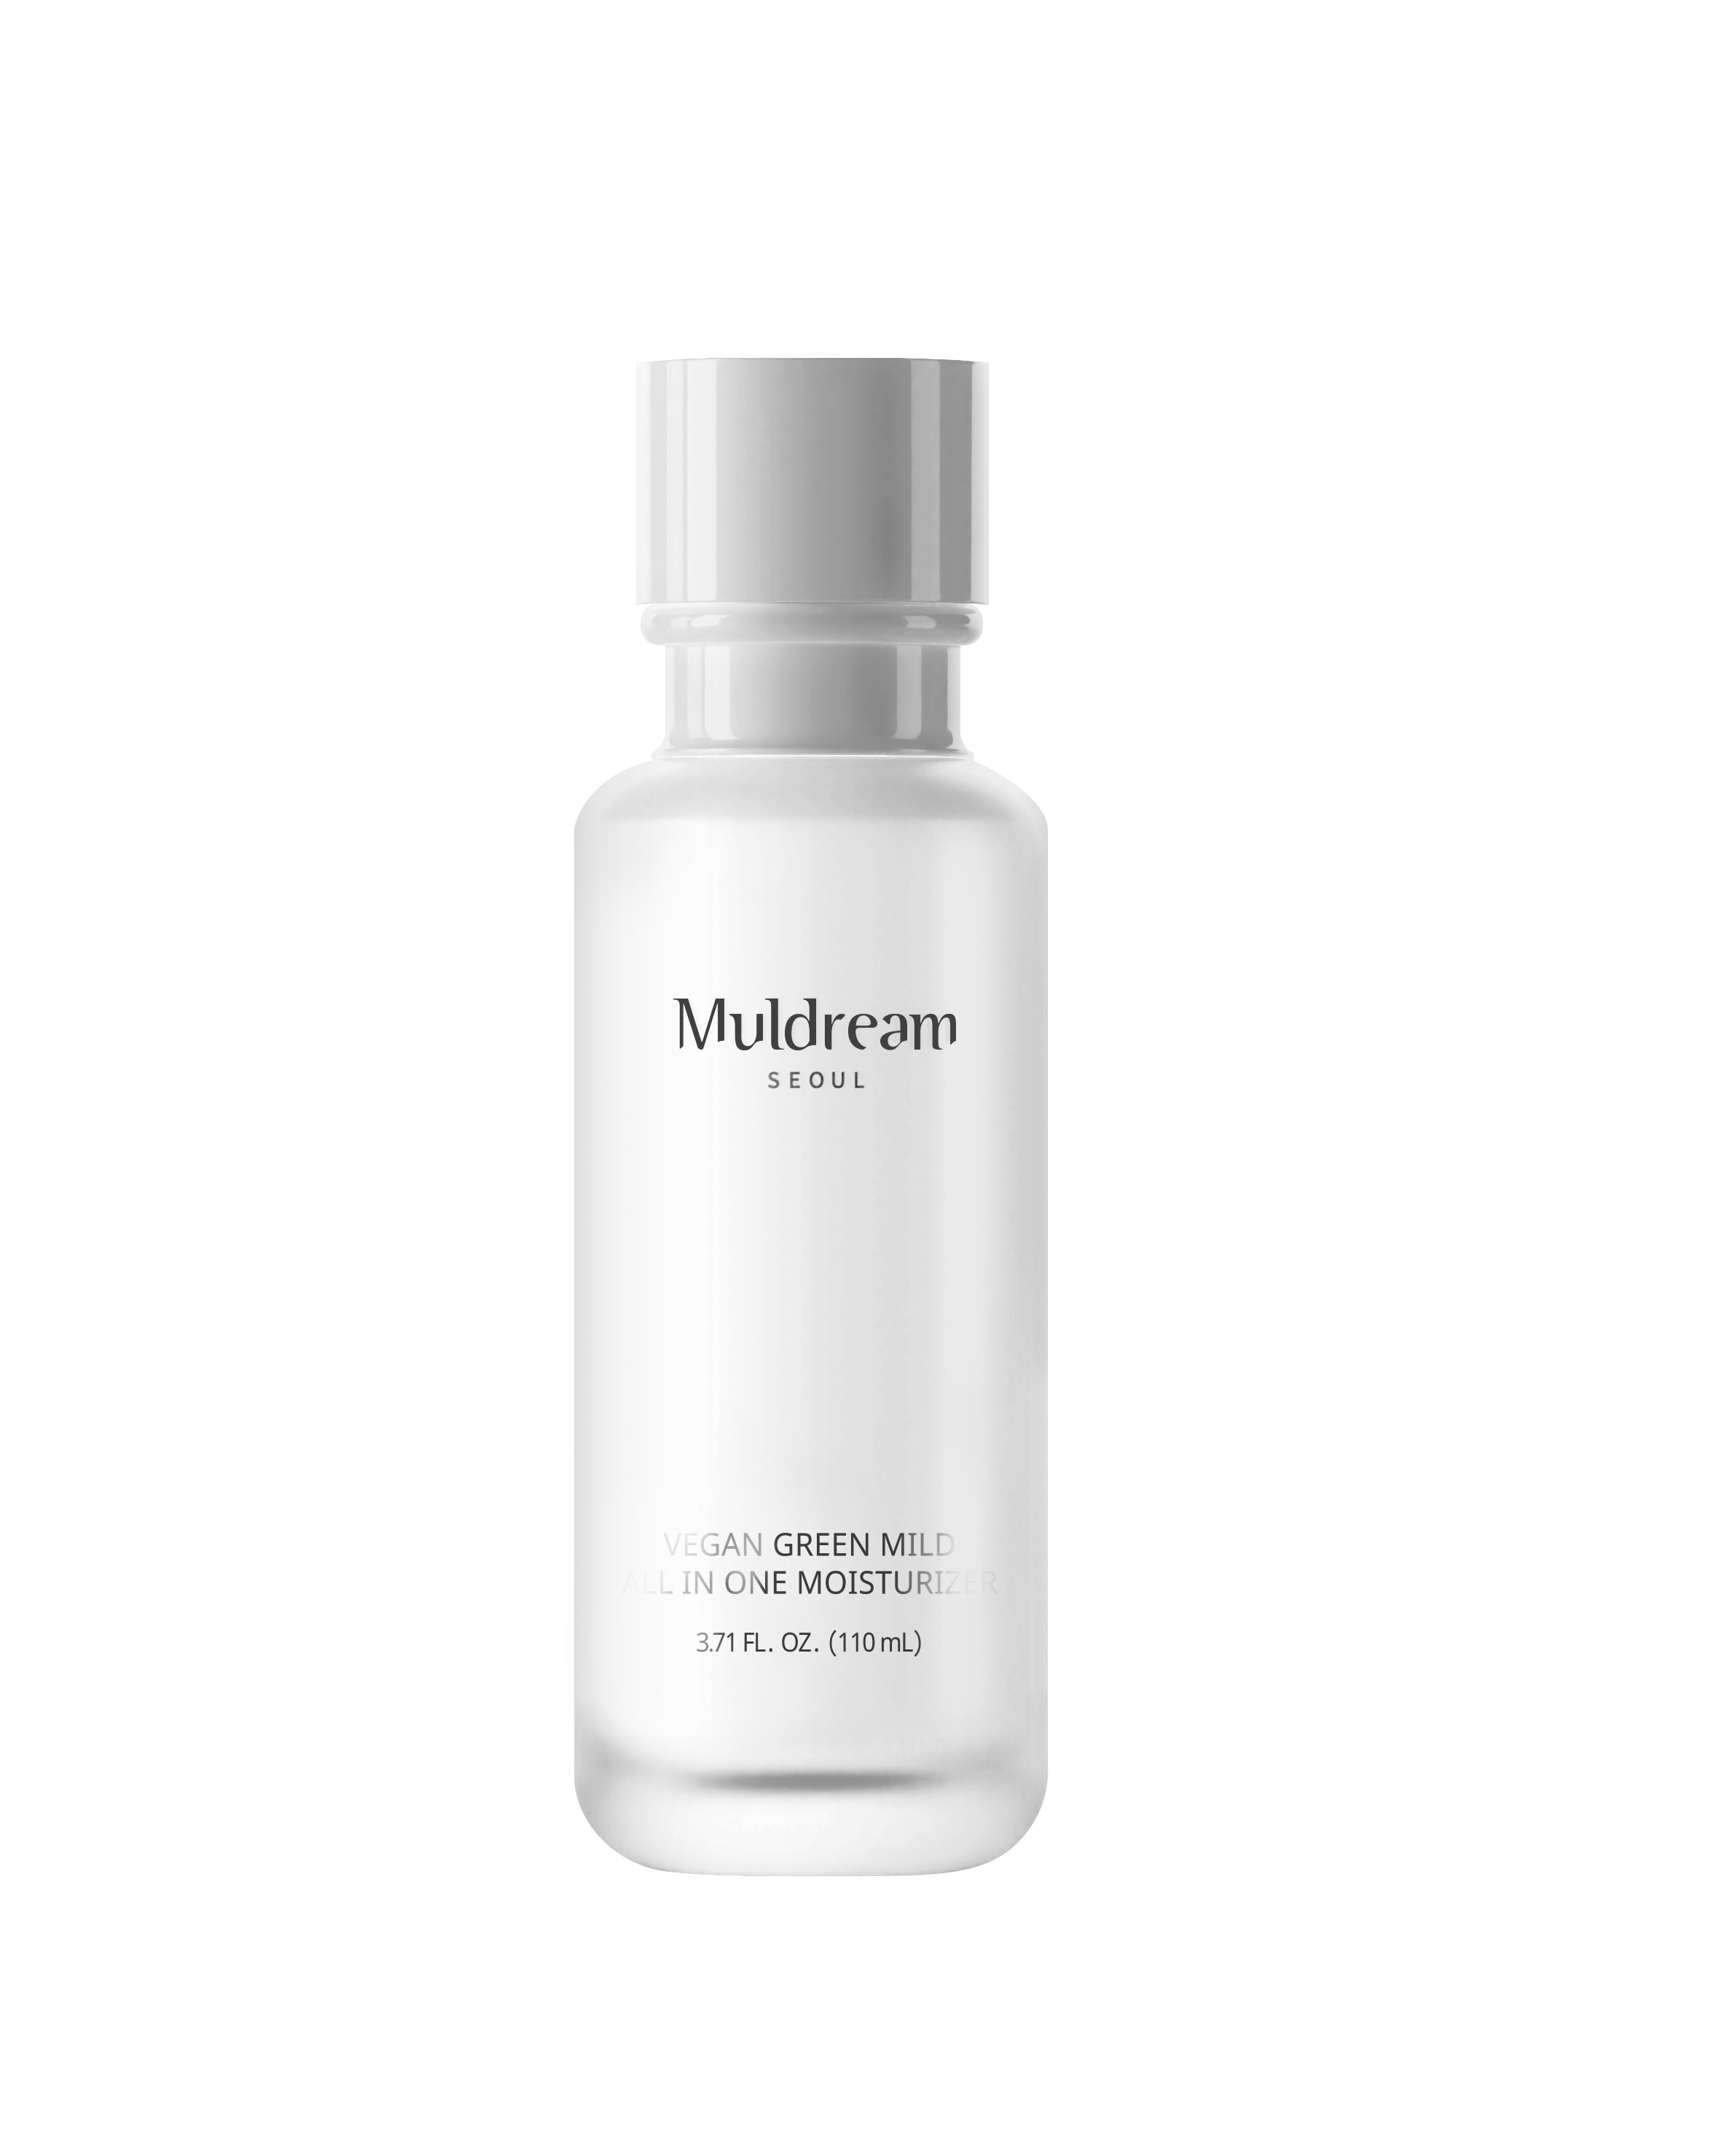 Muldream - All in One Moisturiser (Pink - extremely hydrating)